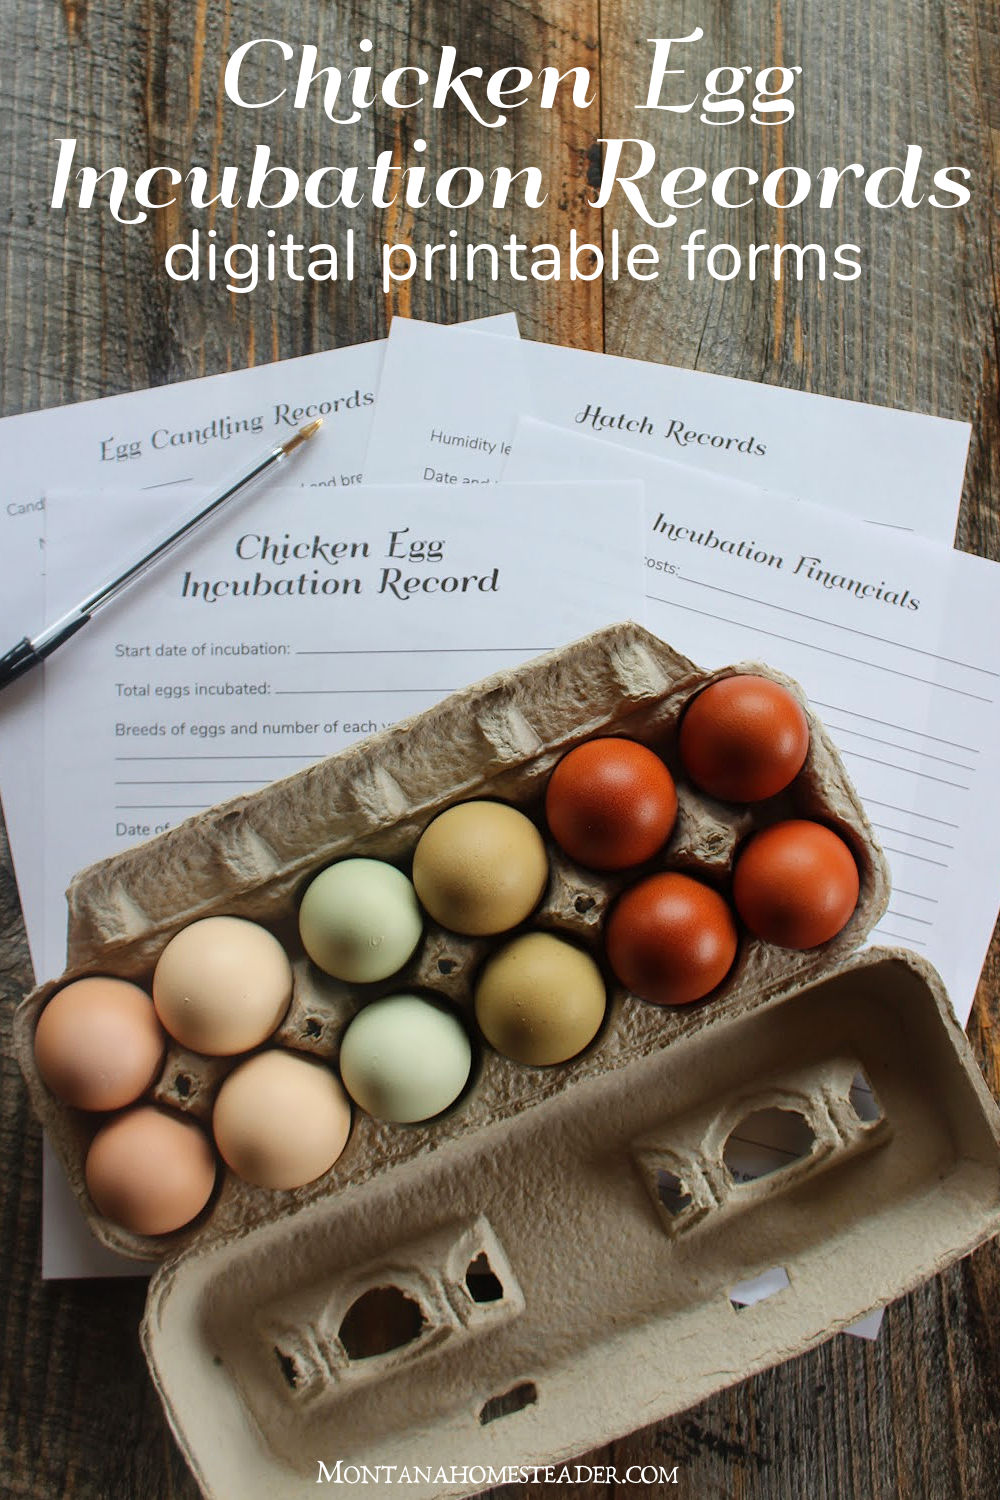 digital printable forms to track chicken egg incubation chick hatching records